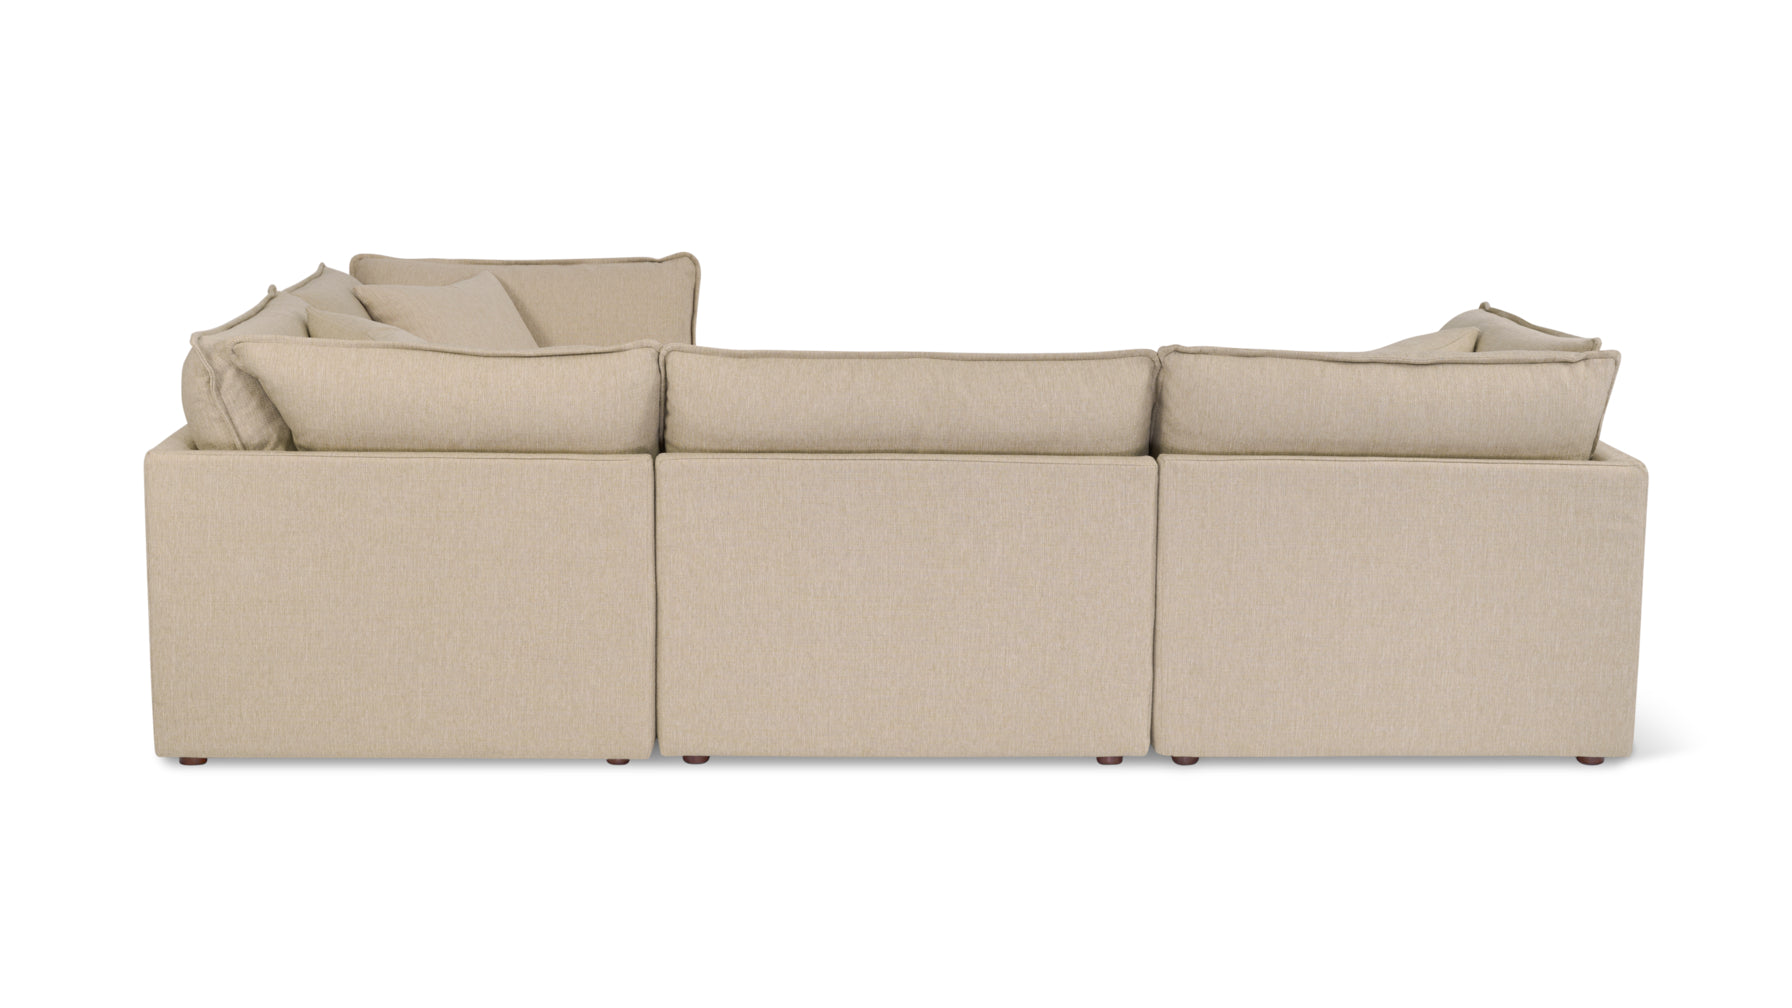 Chill Time 4-Piece Modular Sectional Closed, Biscuit - Image 4